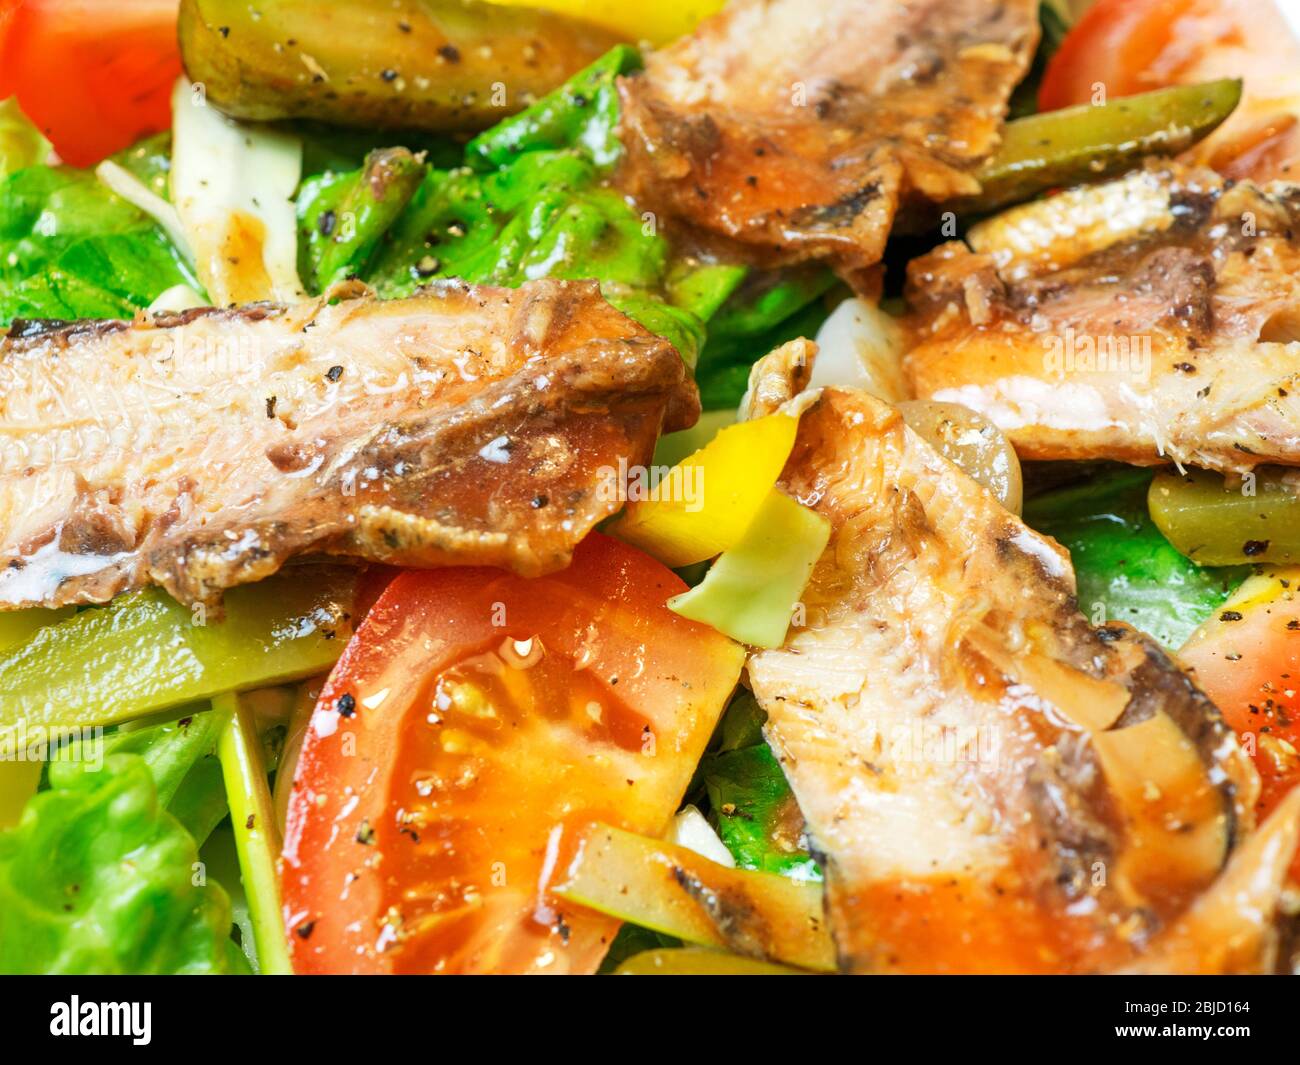 Dressed salad with tinned pilchards lettuce tomatoes yellow peppers sliced gherkins and onions Stock Photo